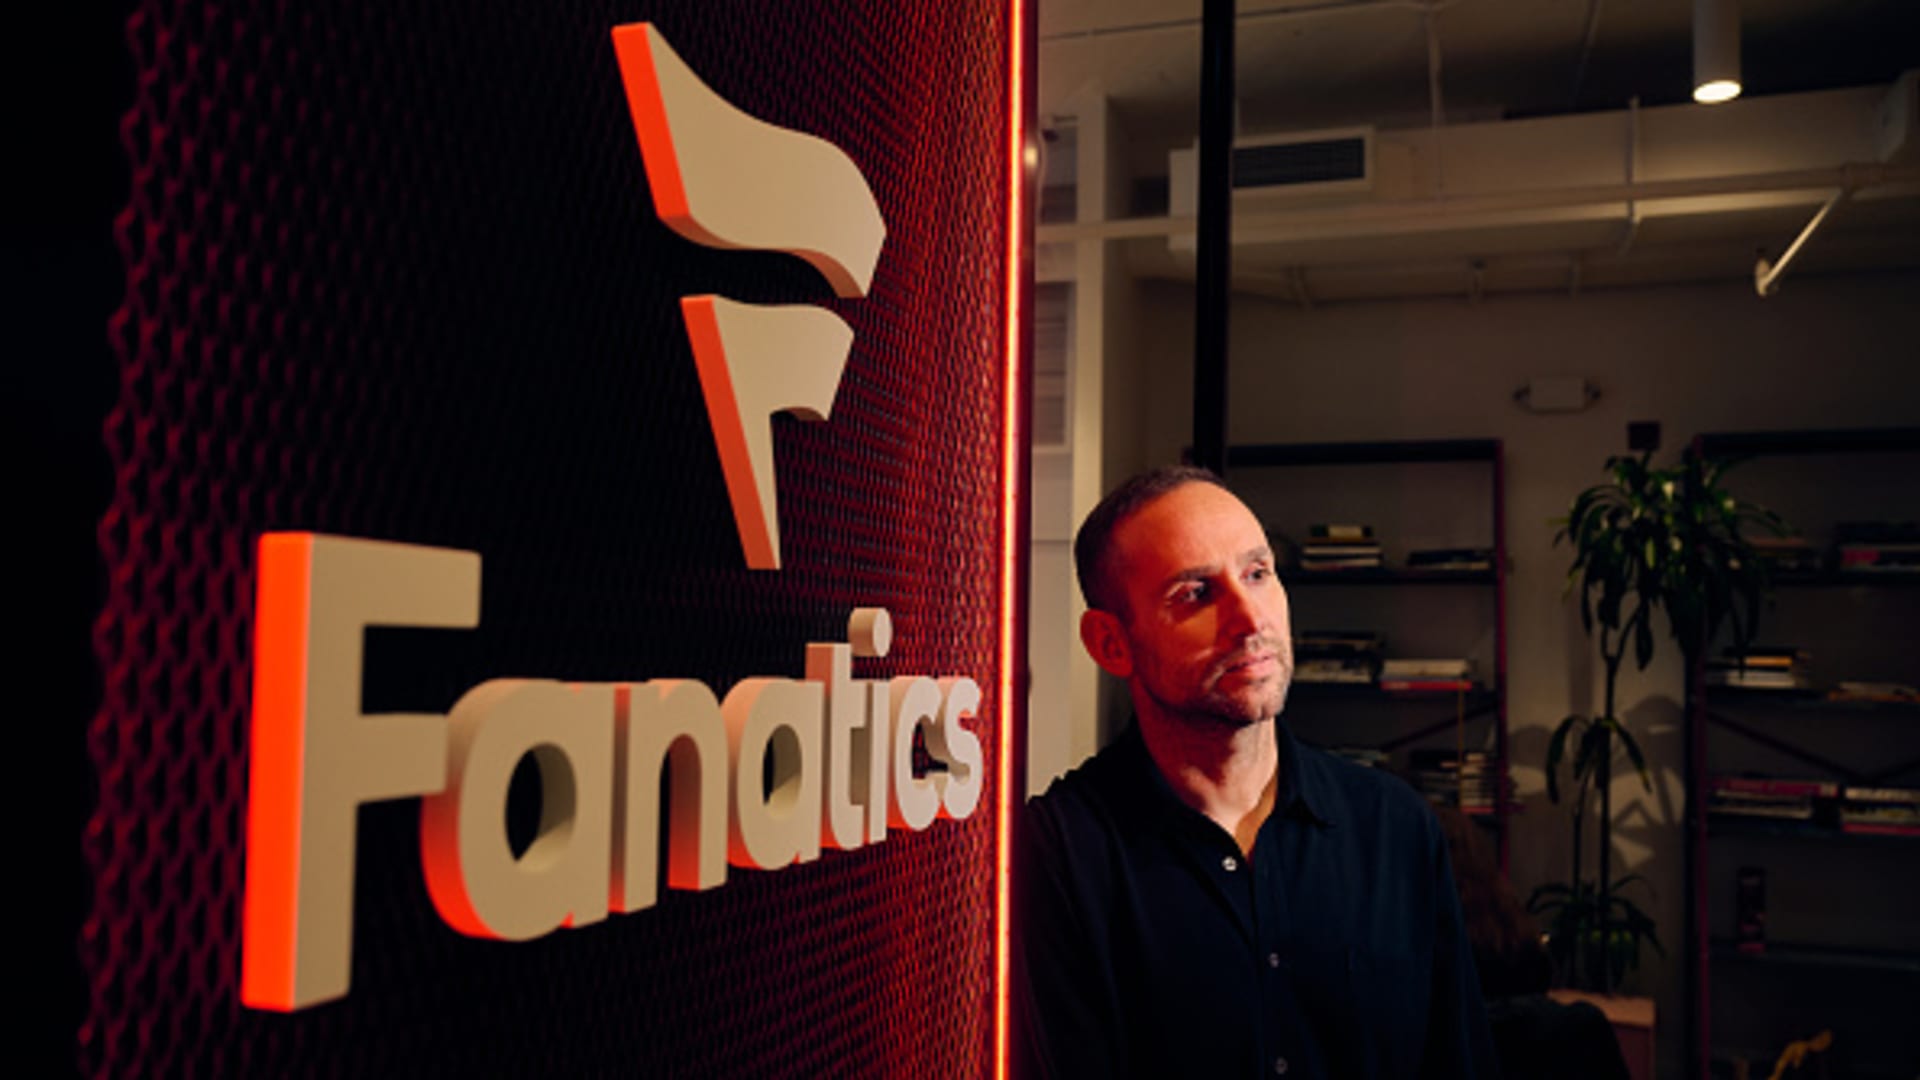 Fanatics founder and CEO Michael Rubin at his office in New York.